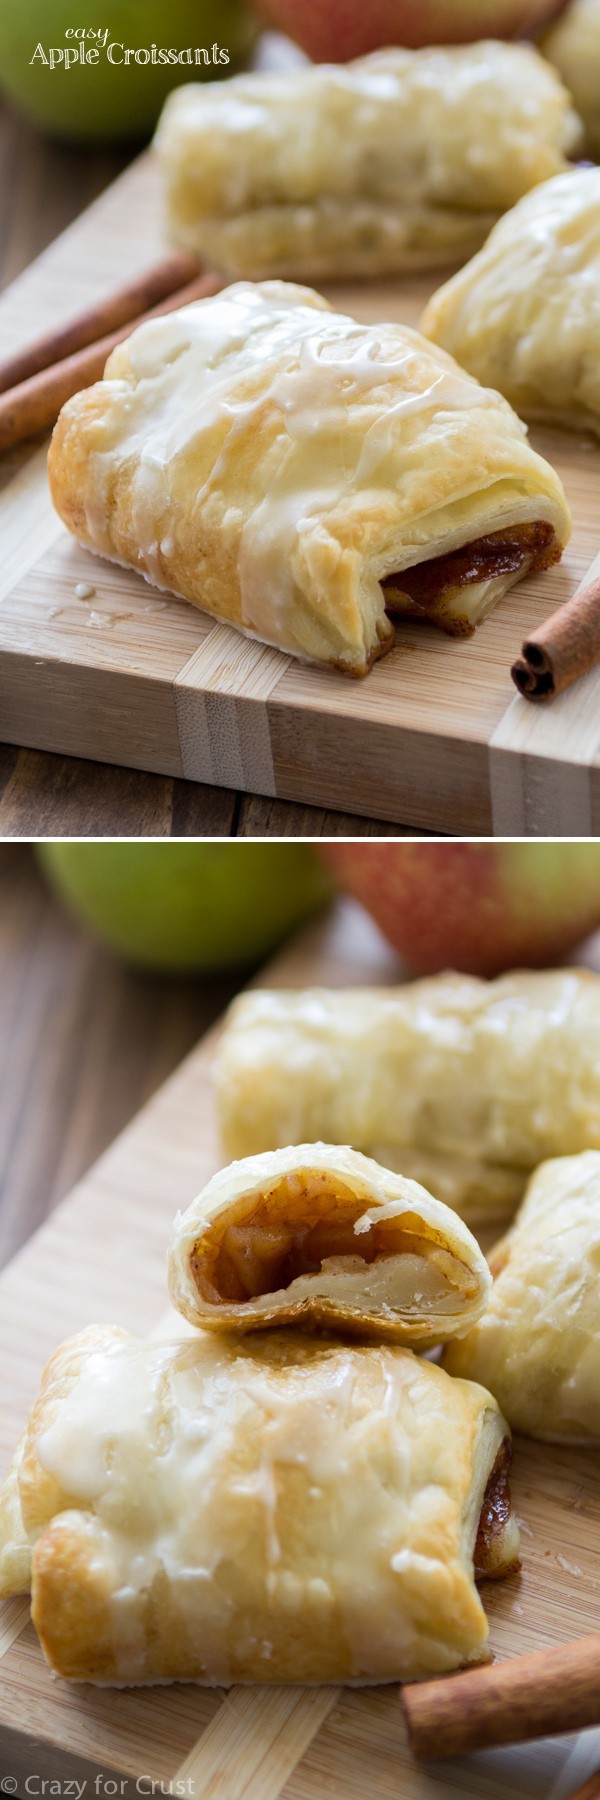 Easy Apple Croissants with apple cider glaze - fast and easy and delicious!